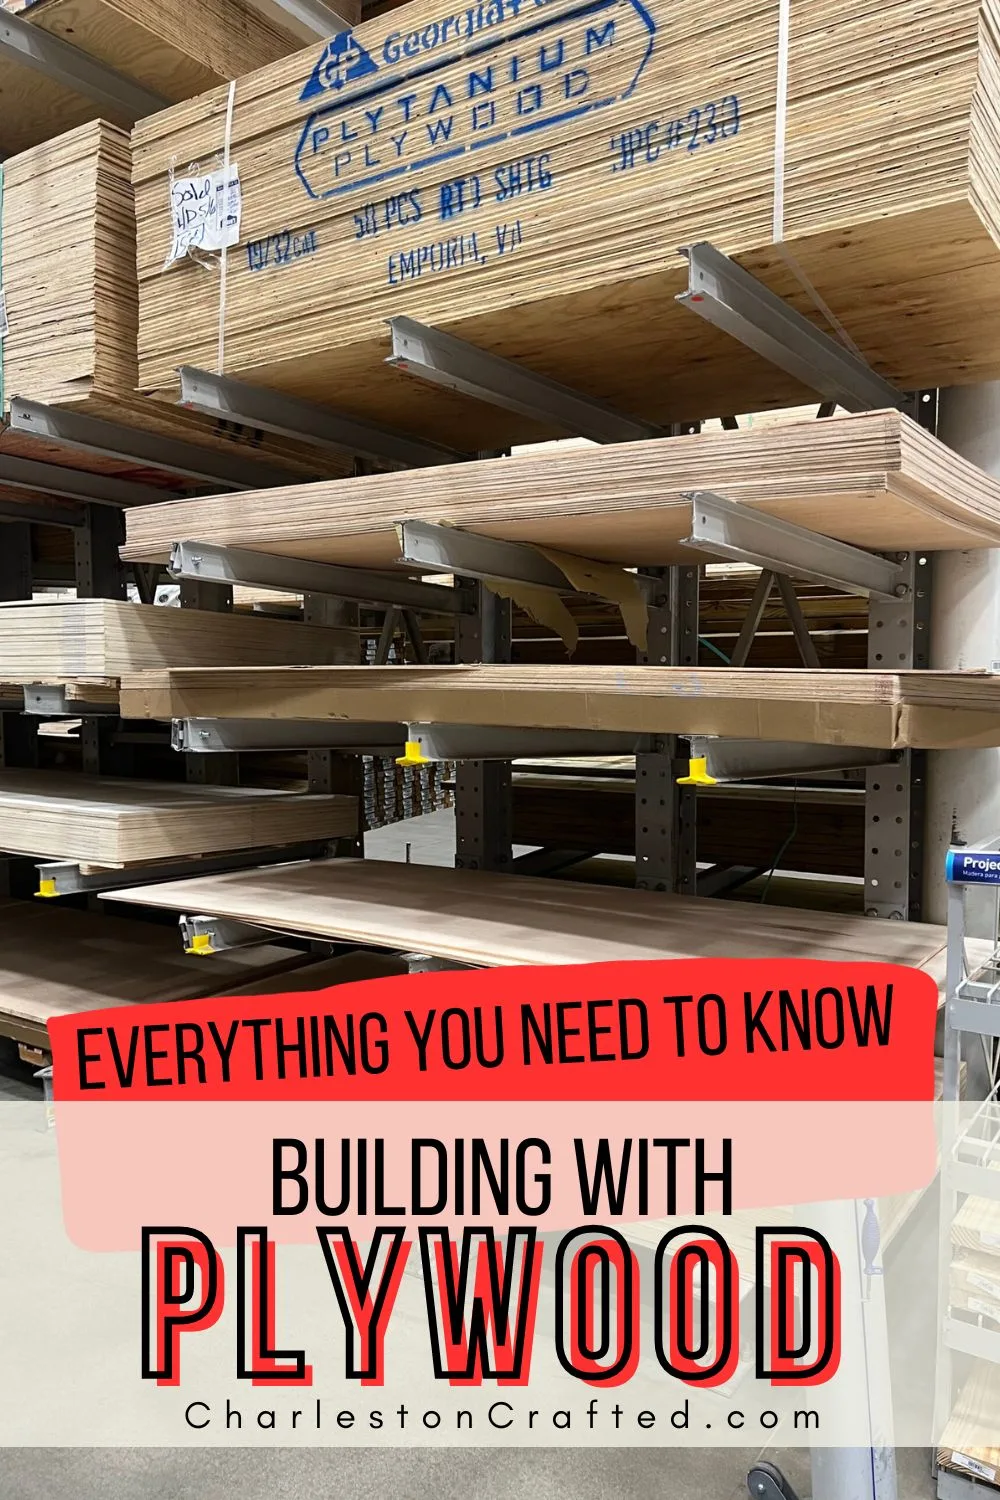 building with plywood - everything you need to know